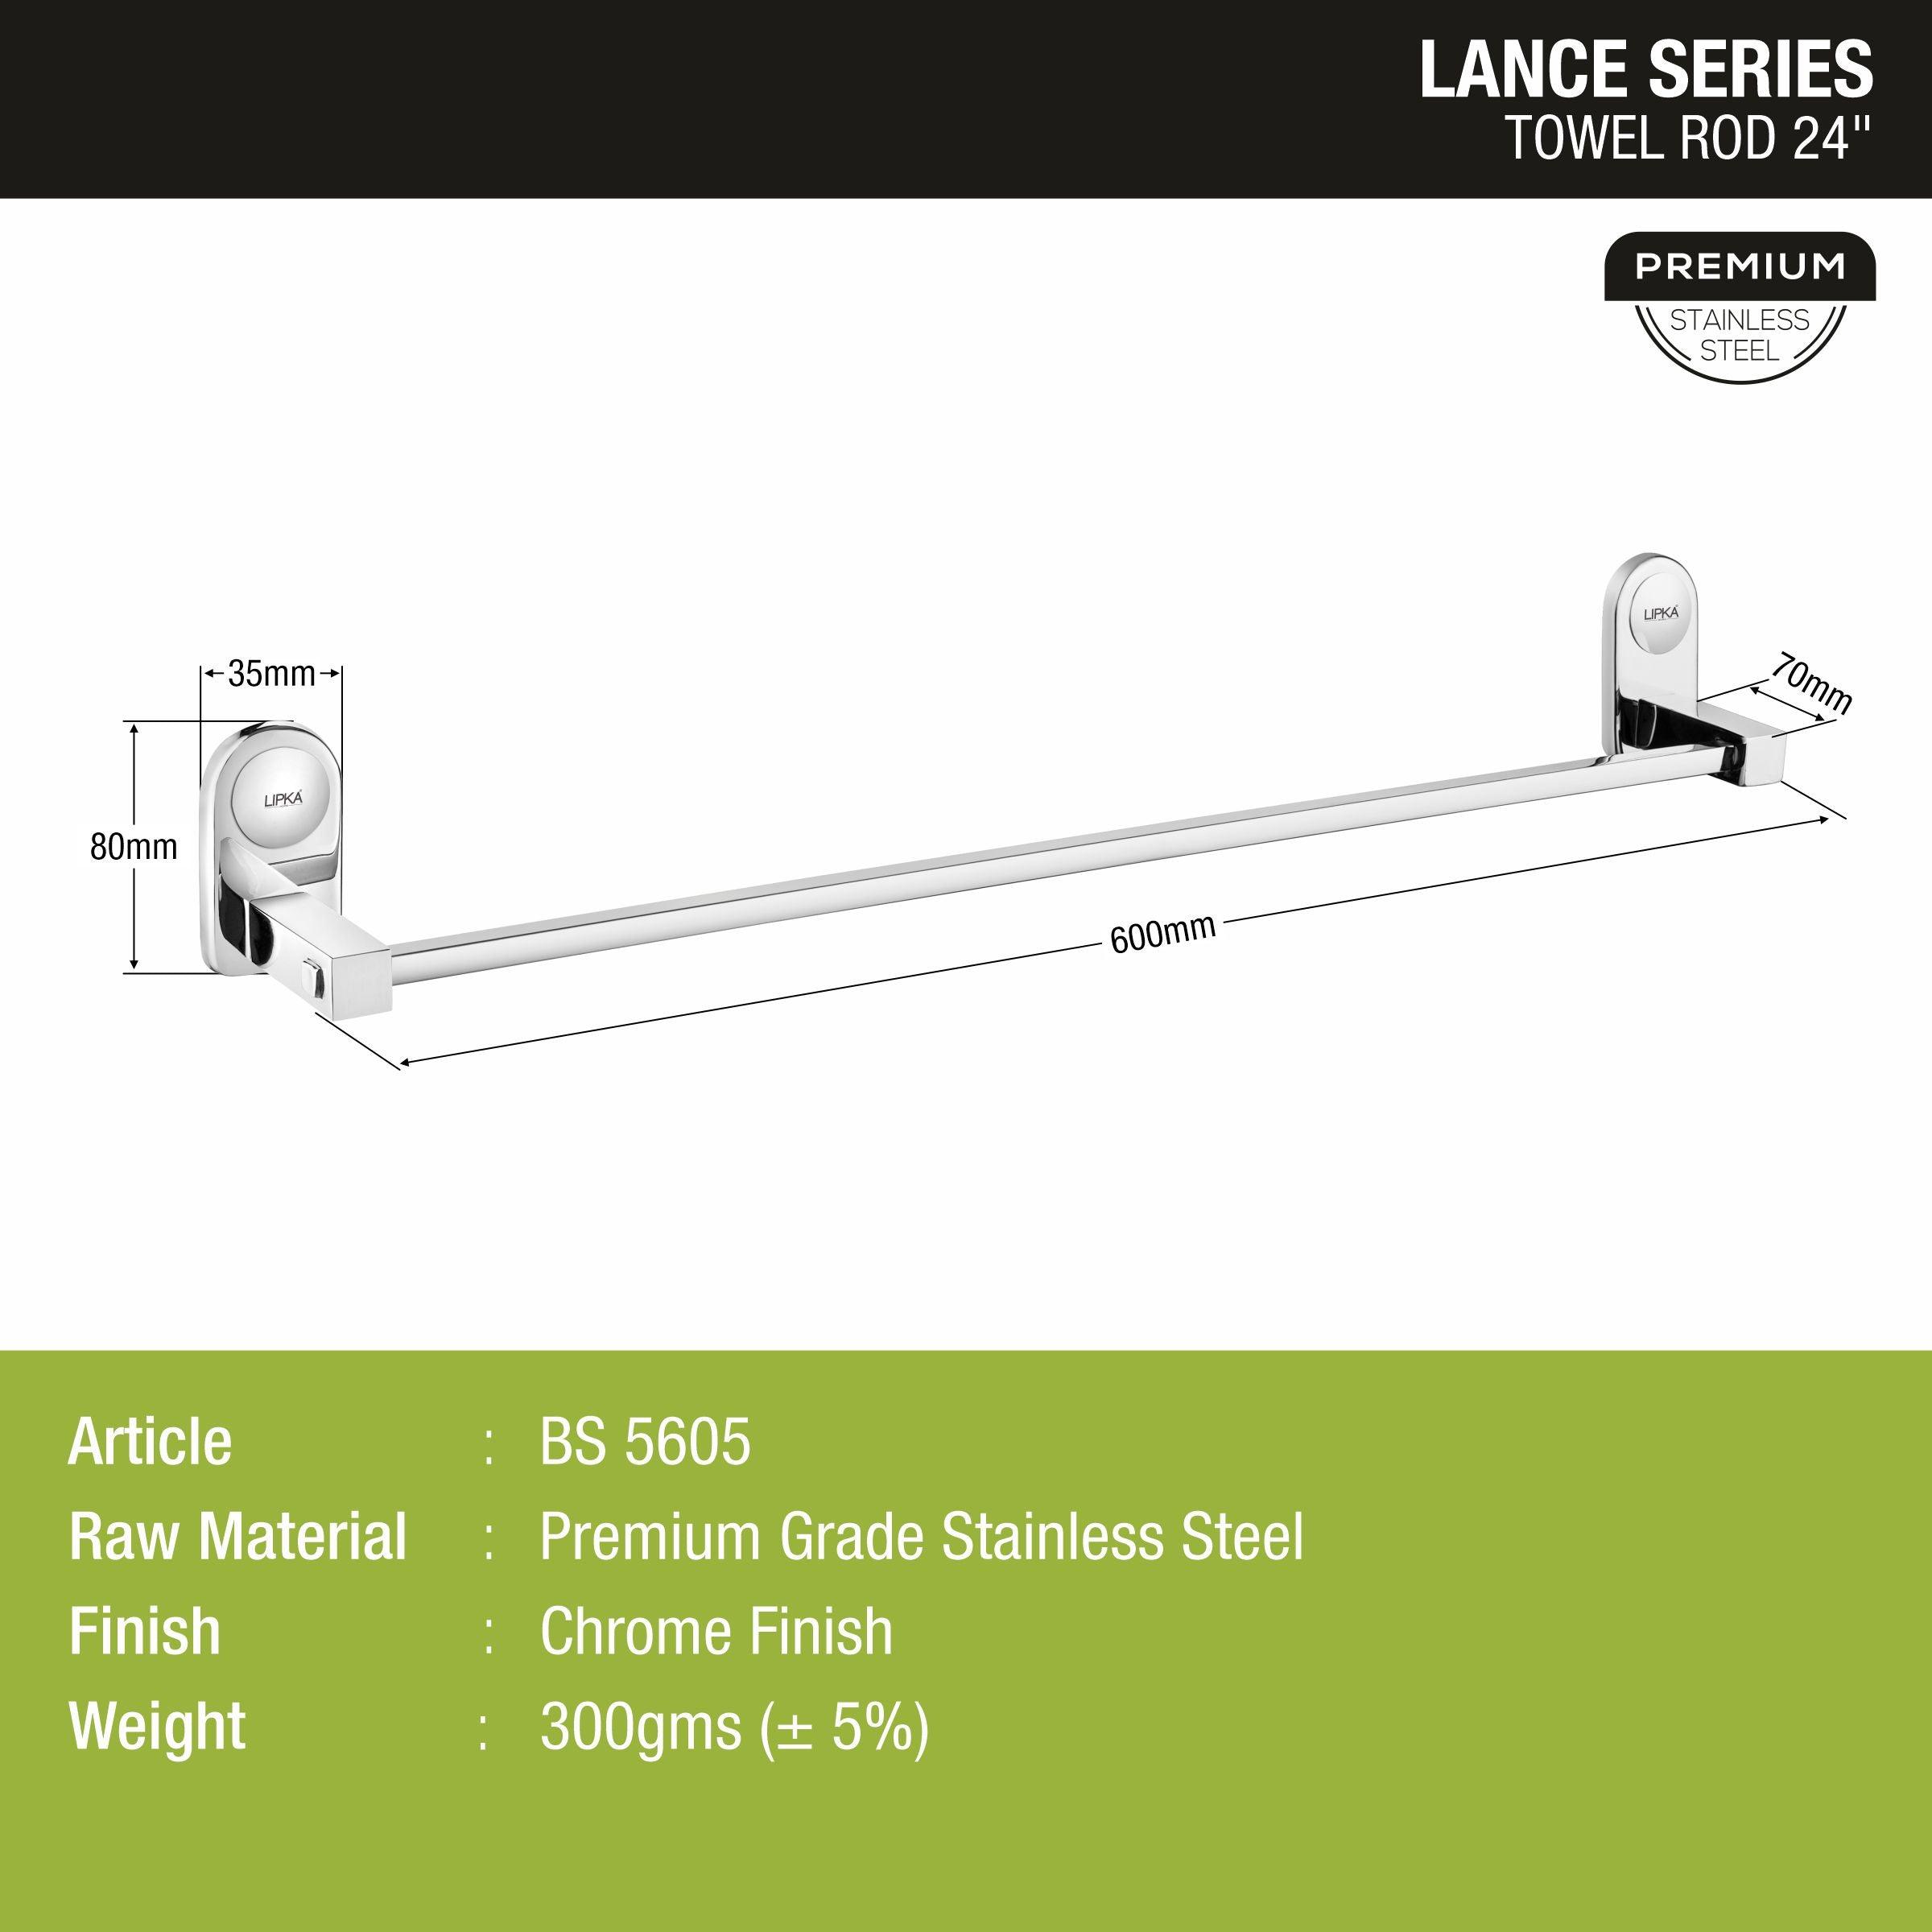 Lance Towel Rod (24 Inches) sizes and dimensions